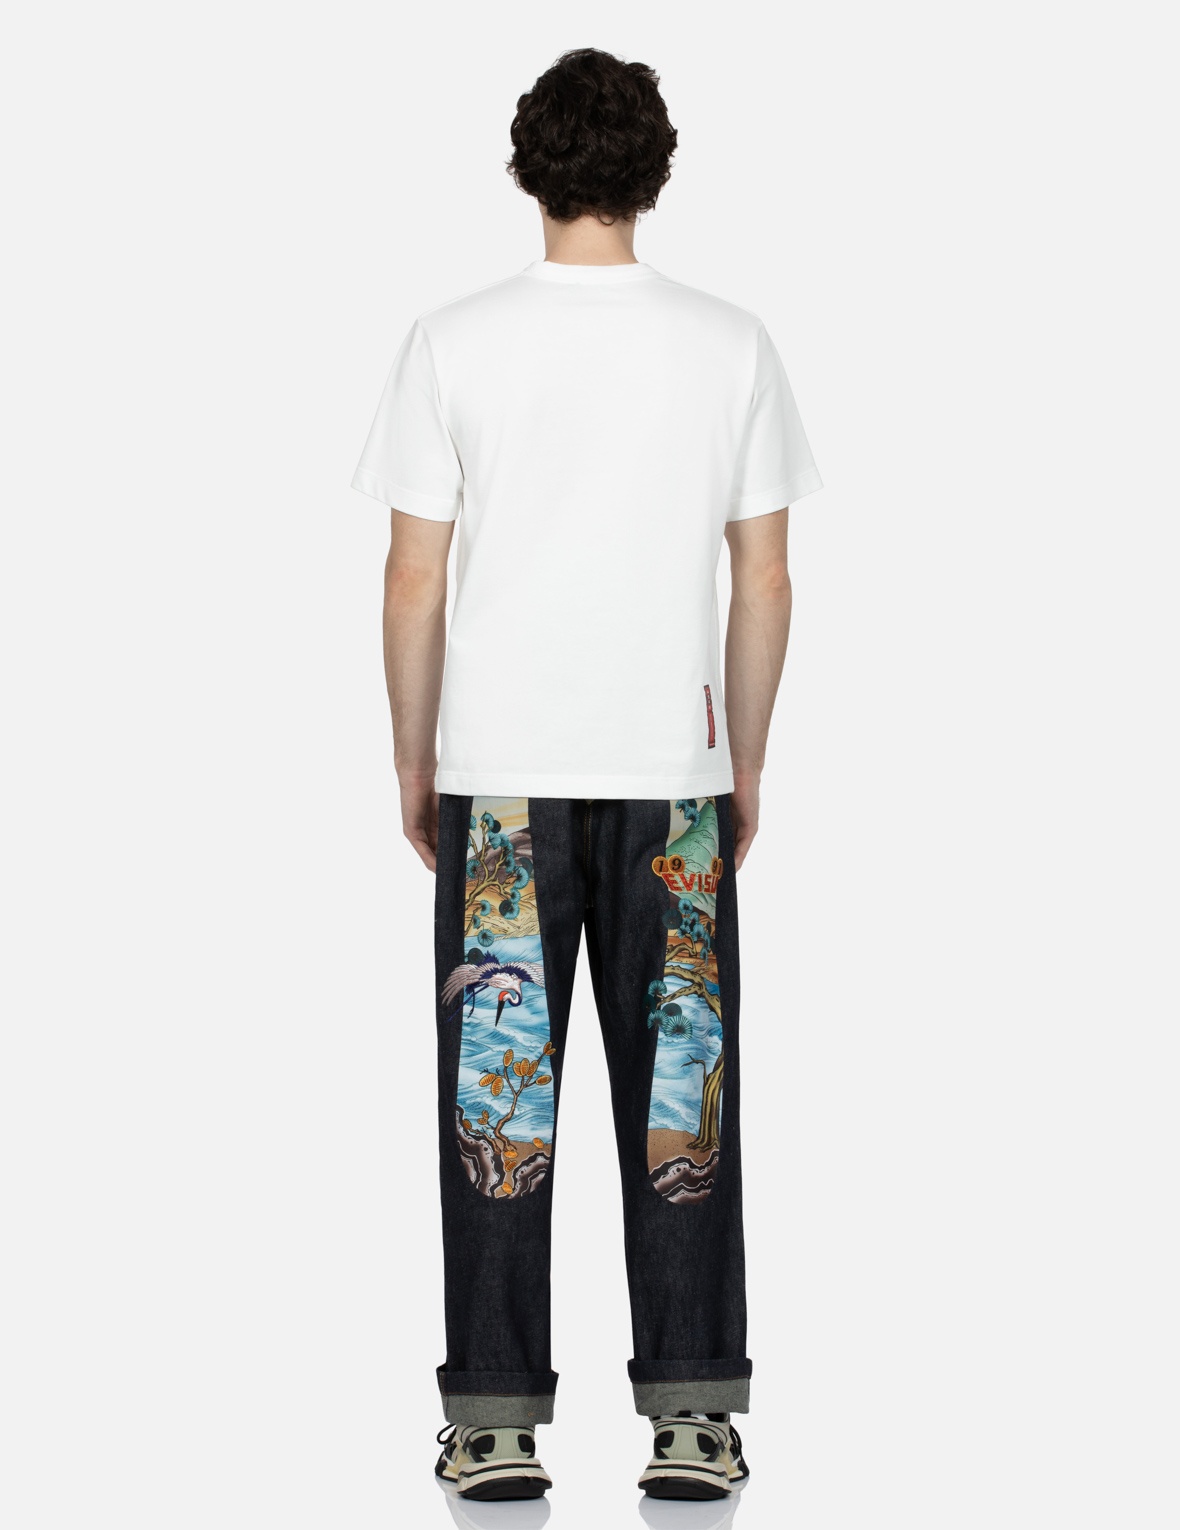 PINE-PATTERN DAICOCK PRINT WITH CRANE AND LOGO EMBROIDERY WIDE LEG JEANS - 5